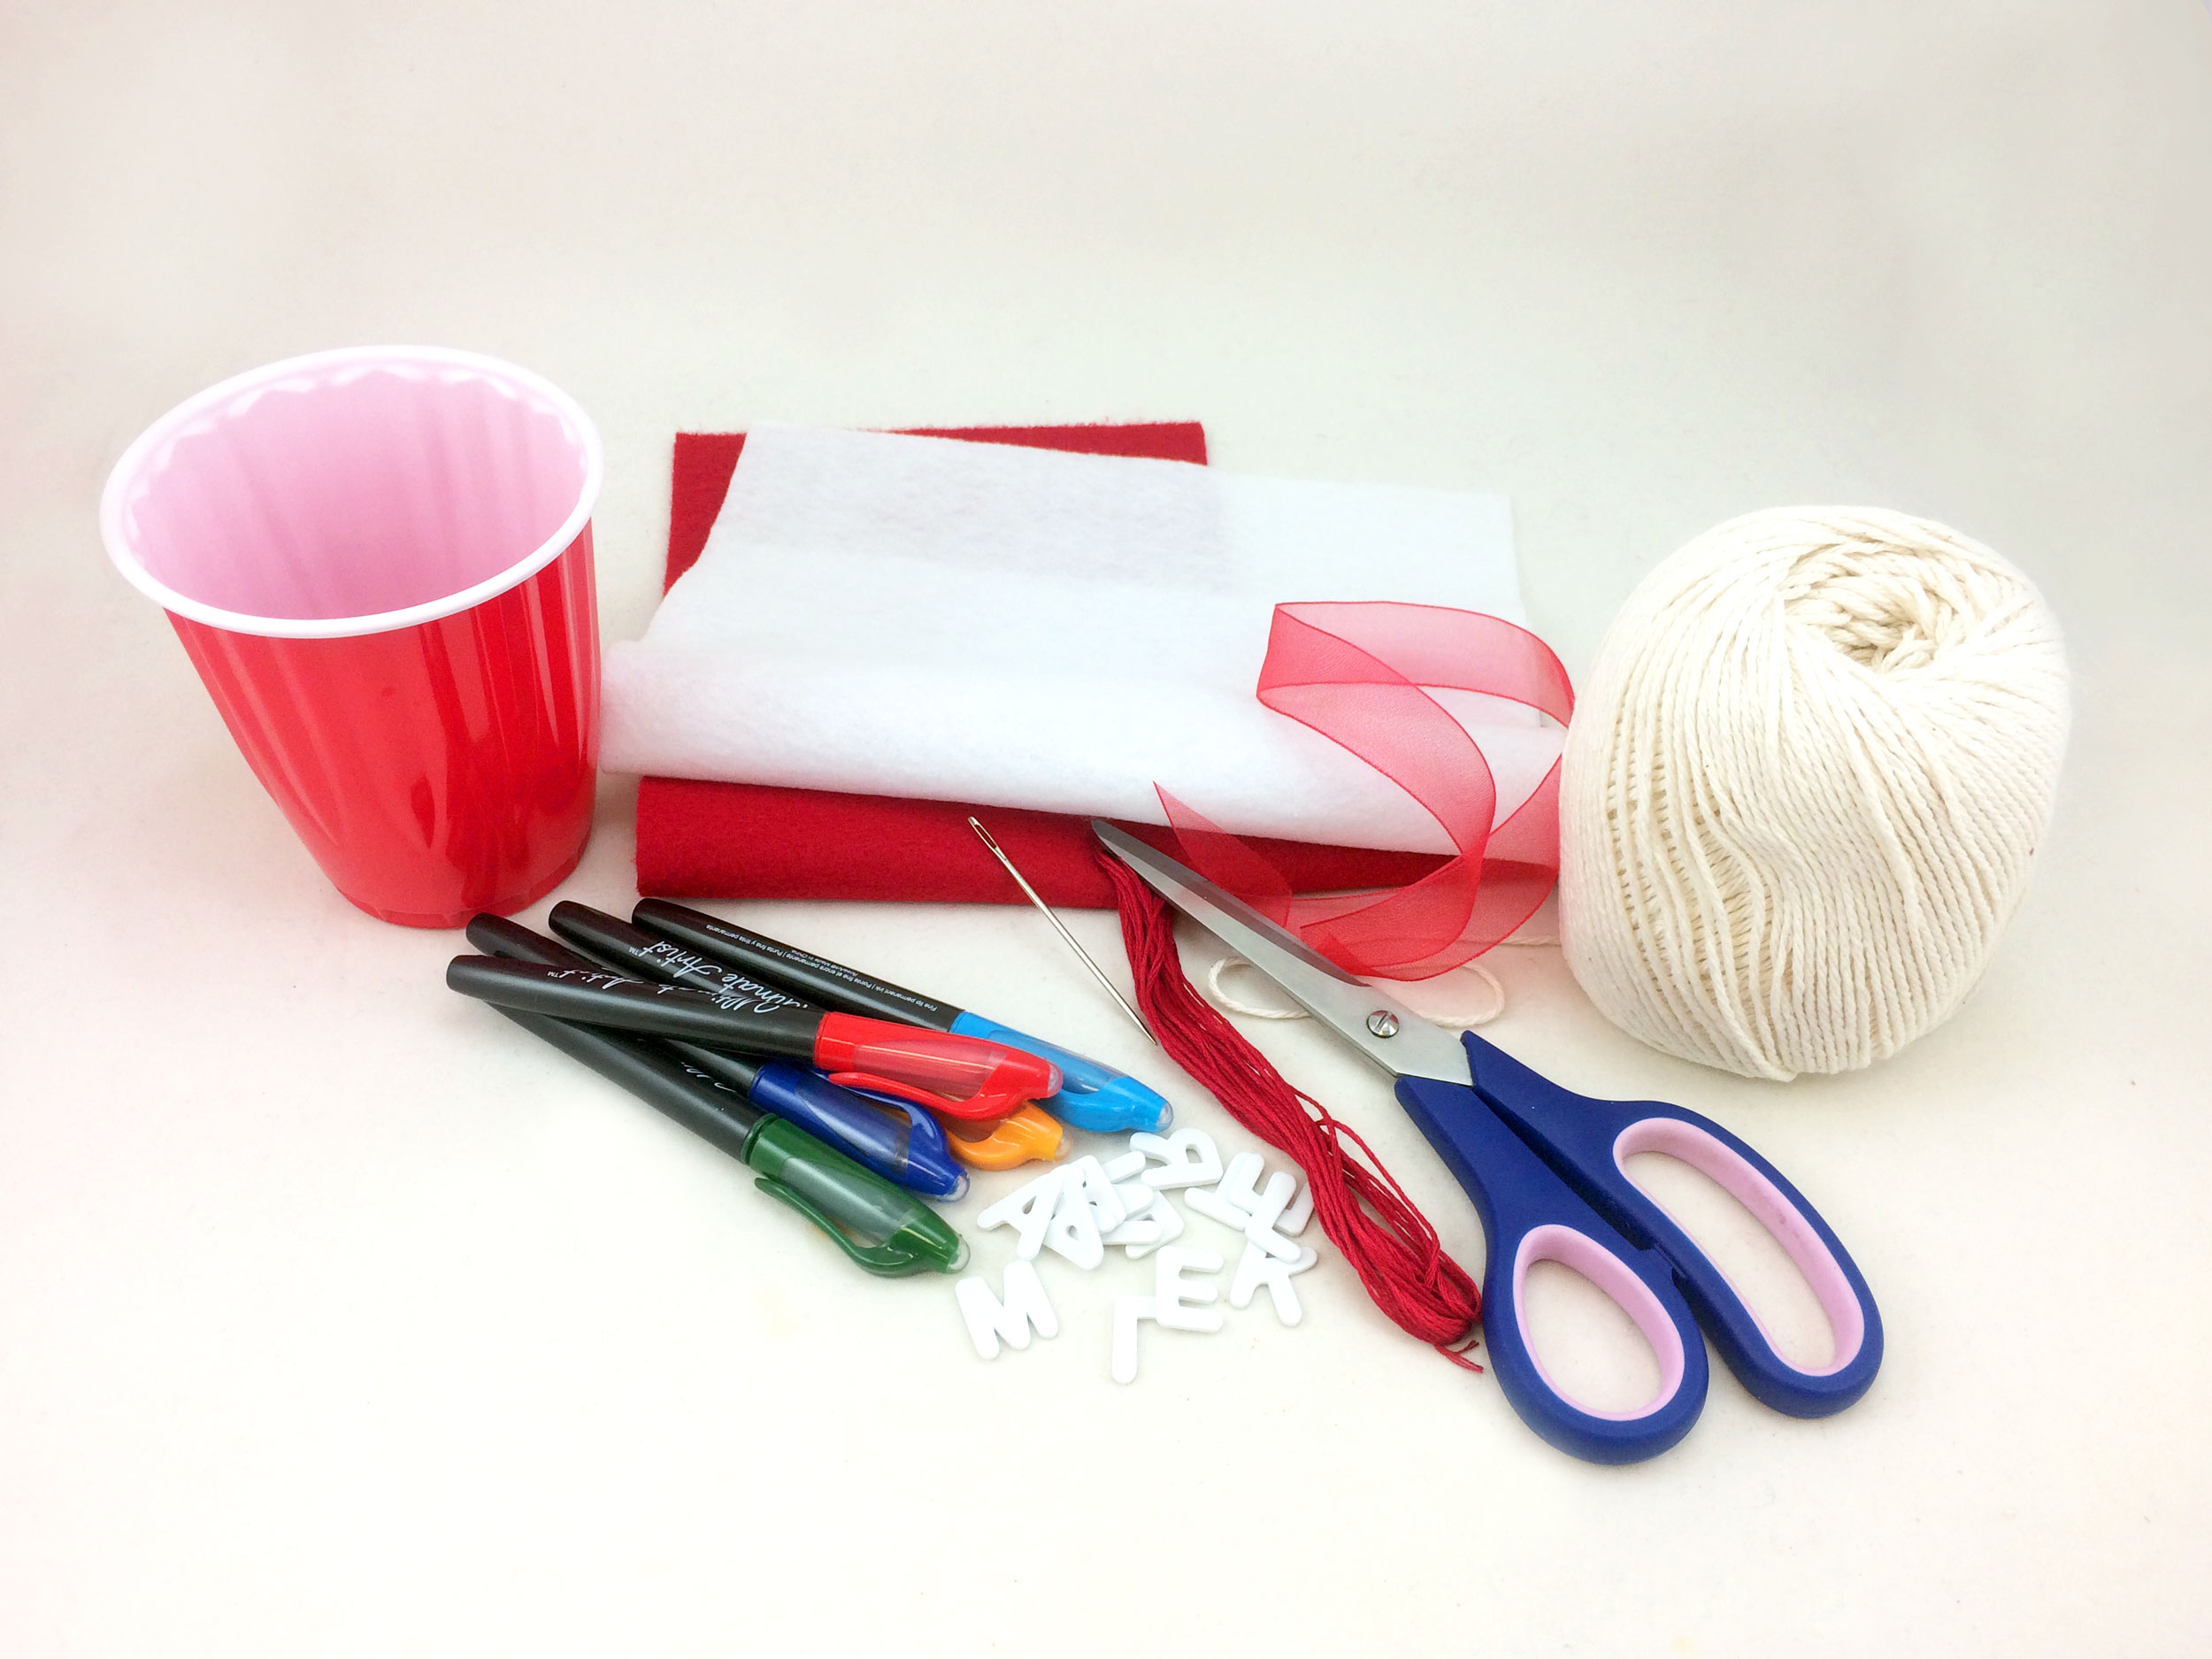 Baseball Ornament supplies on table, such as scissors, felt, markers, plastic cup, and string. | OrnamentShop.com